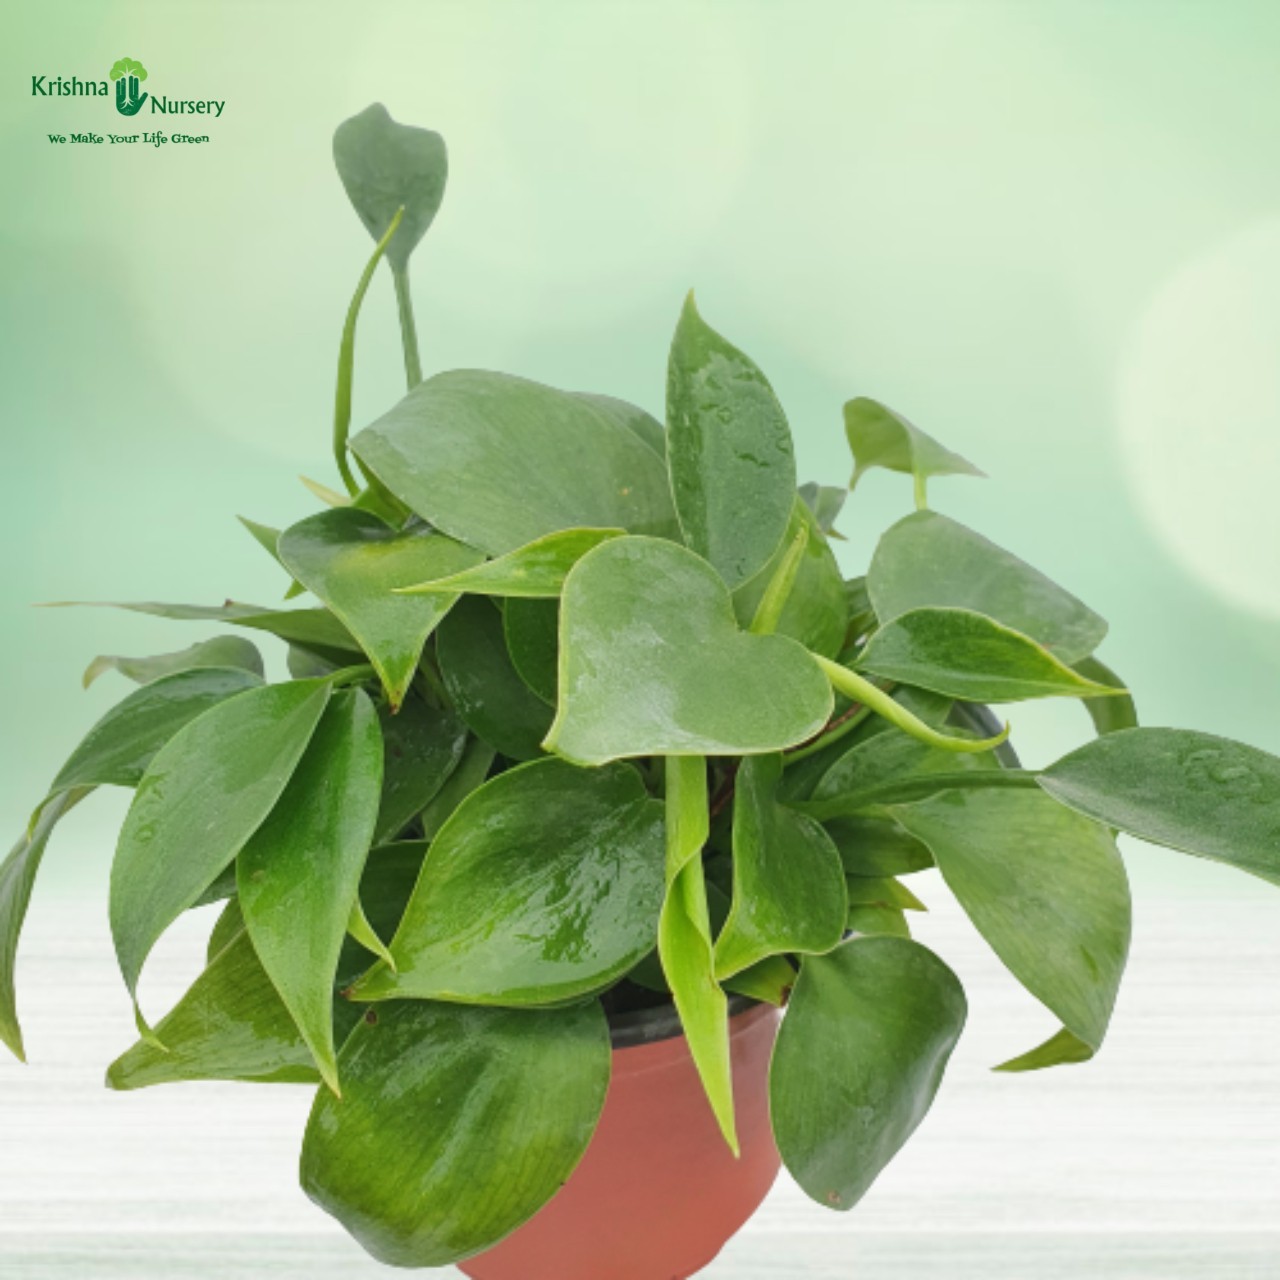 Philodendron Oxycardium Plant - 4 inch - Red Pot